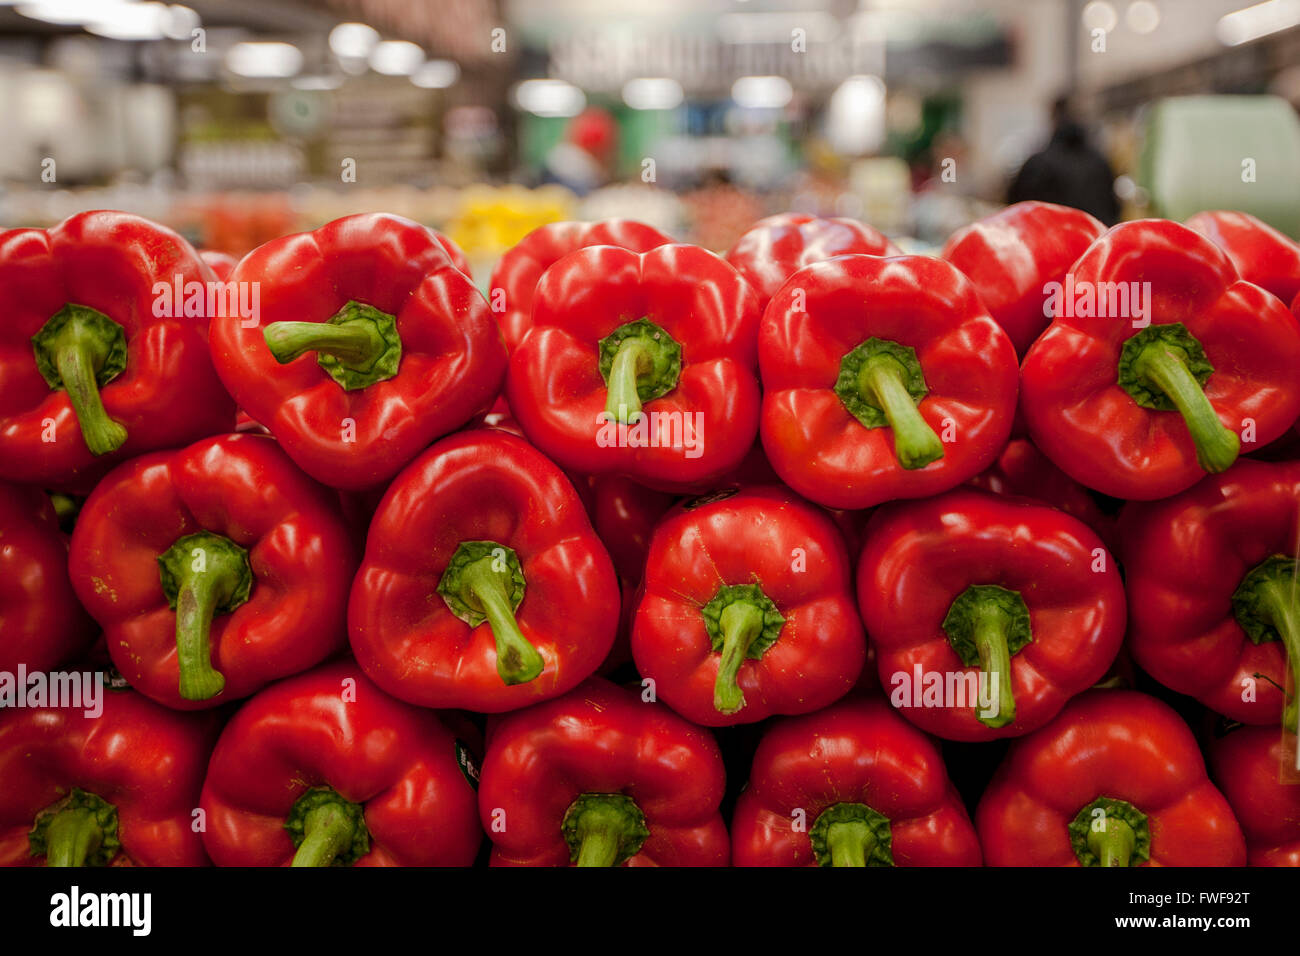 a display of red peppers at a Whole Foods Market in the produce section Stock Photo